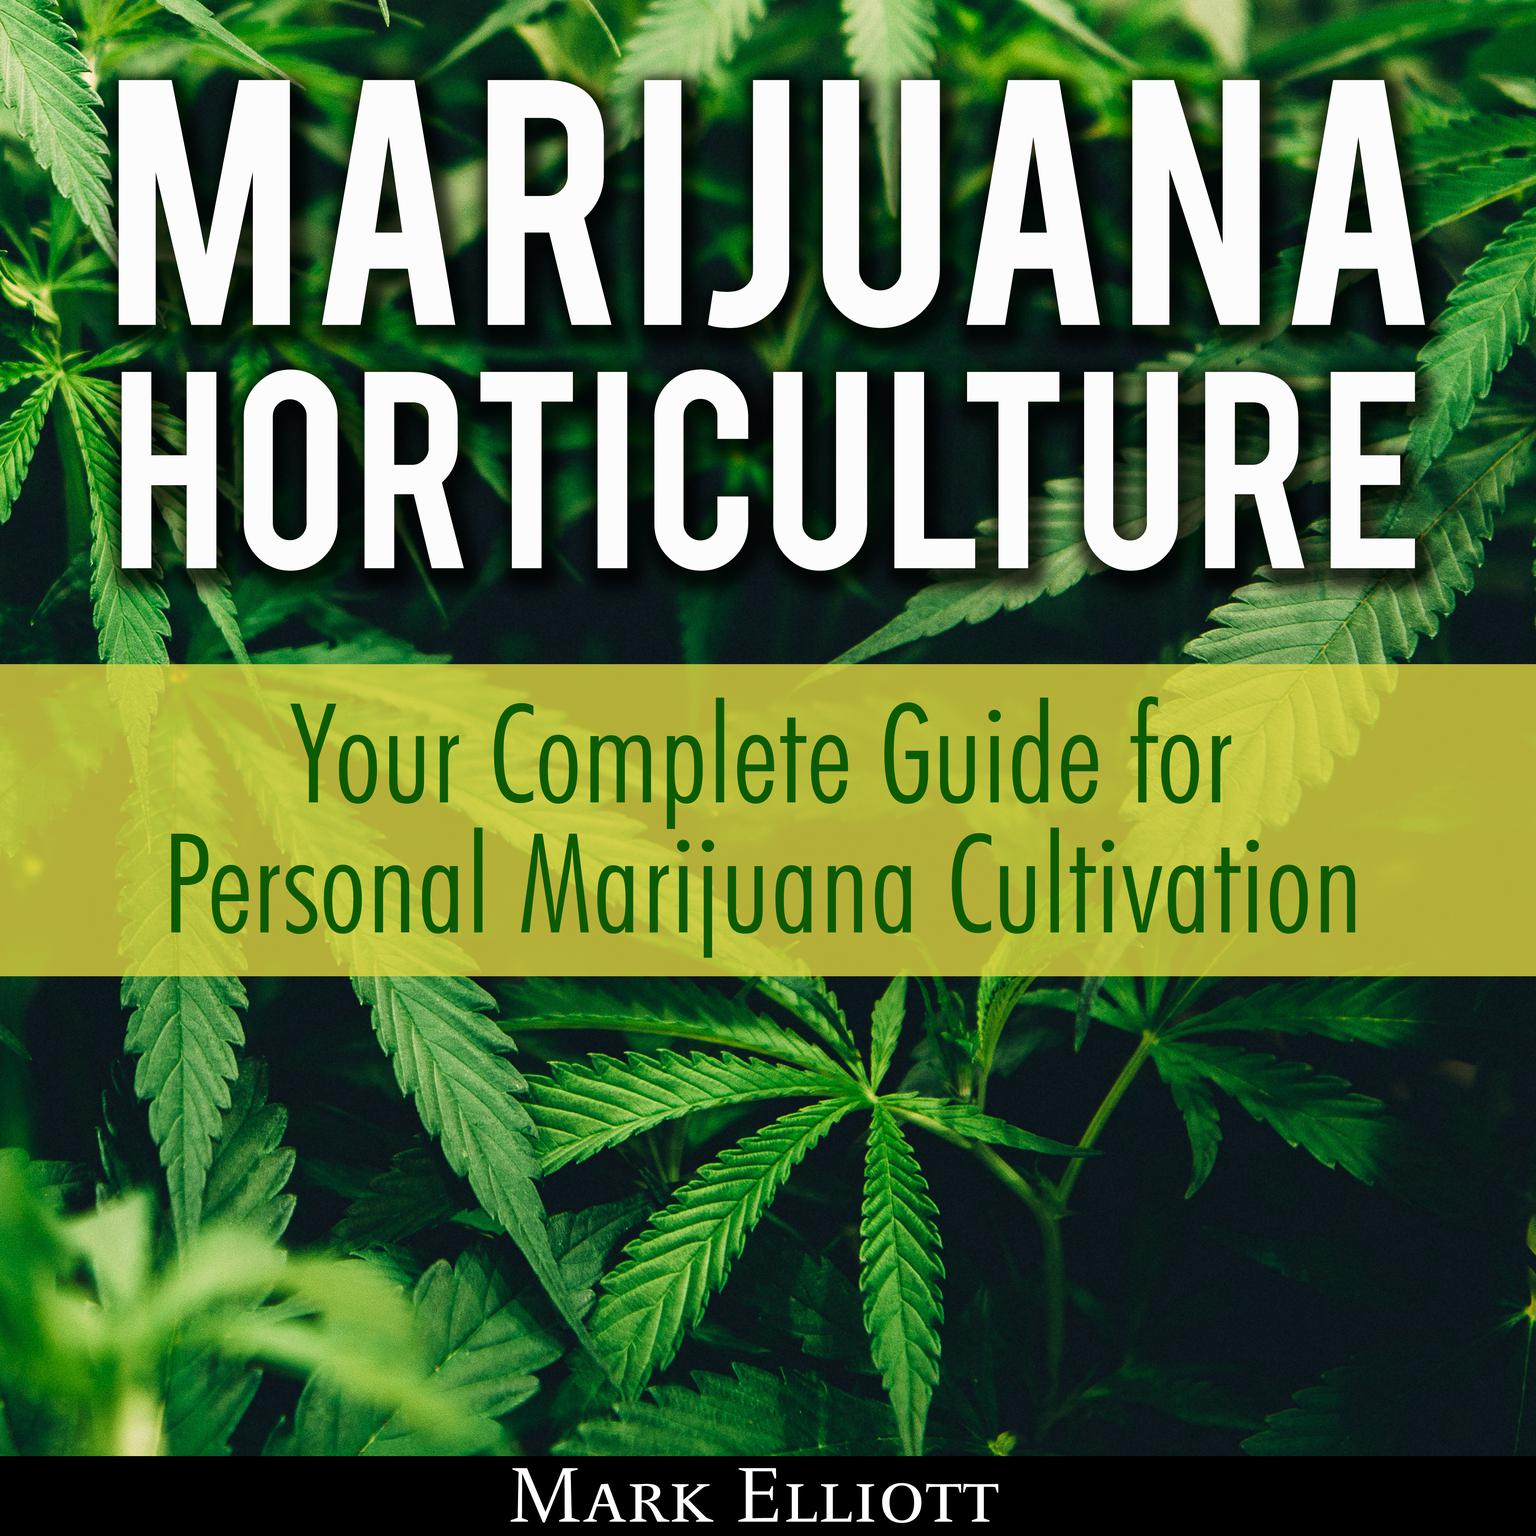 Marijuana Horticulture: Your Complete Guide for Personal Marijuana Cultivation Audiobook, by Mark Elliott